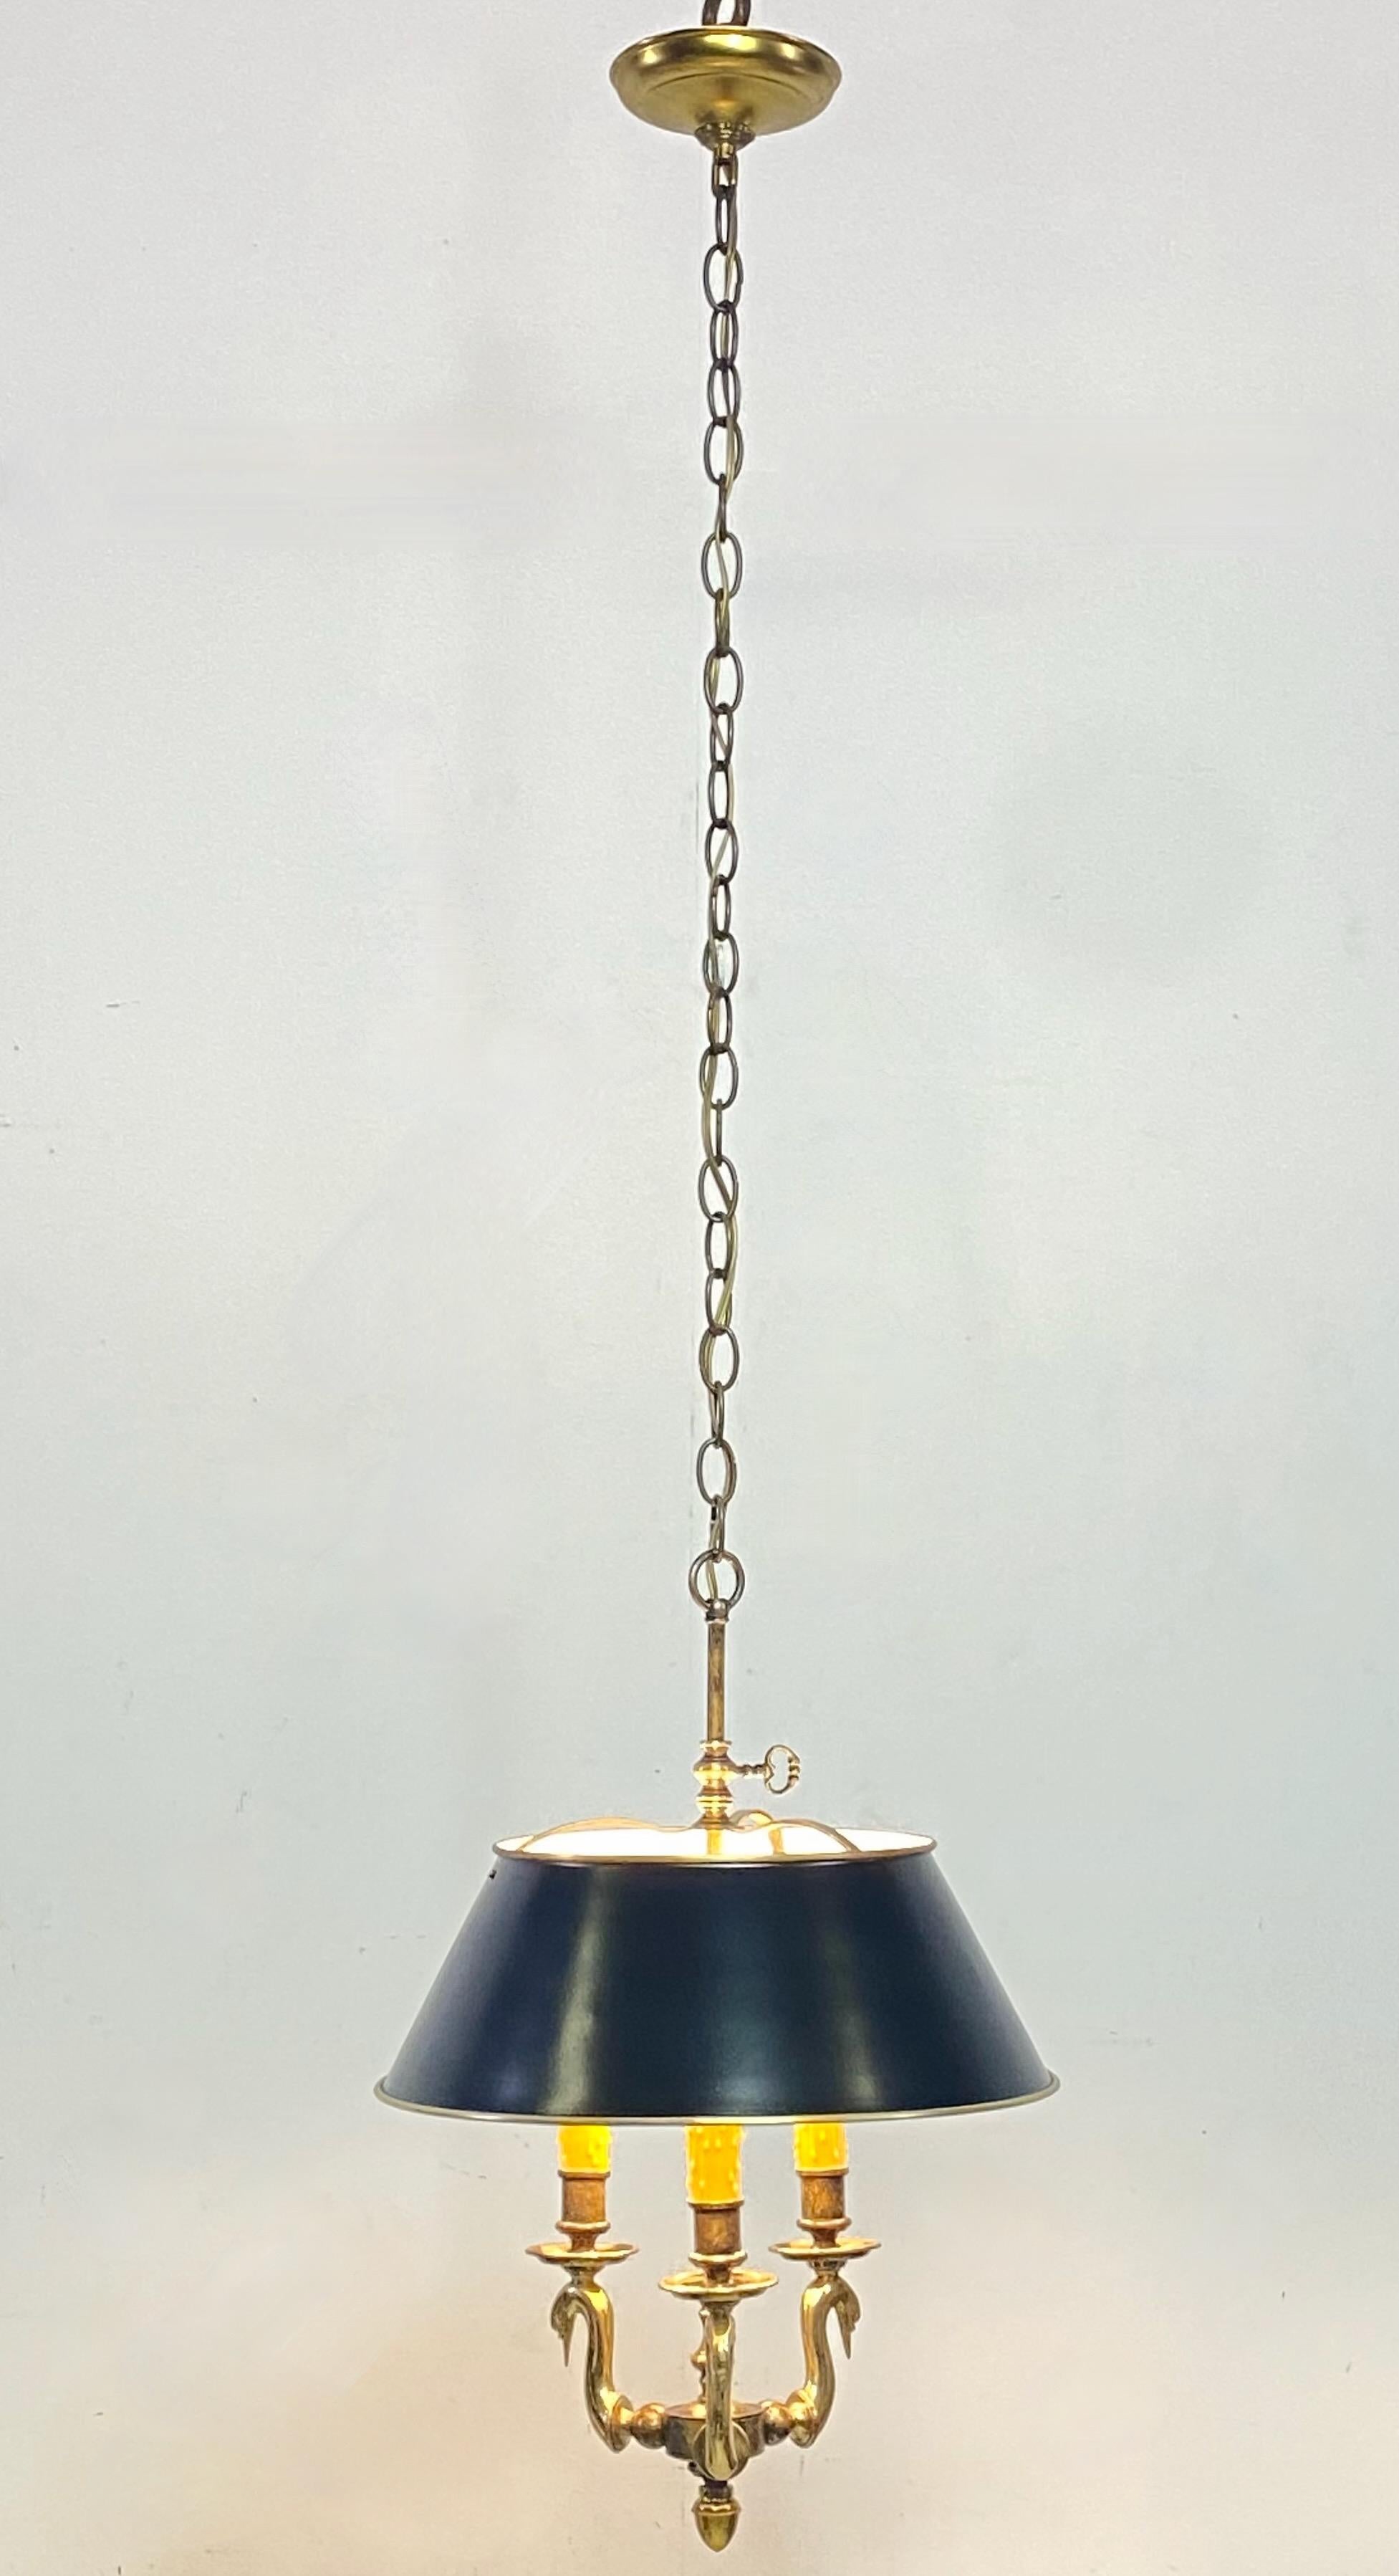 A solid brass bouillotte style hanging light fixture with black shade.
Re-wired and refurbished with new beeswax candle sleeves. Ready to install.
The measurement height of the lamp only is 15 inches. We can shorten the chain to buyers